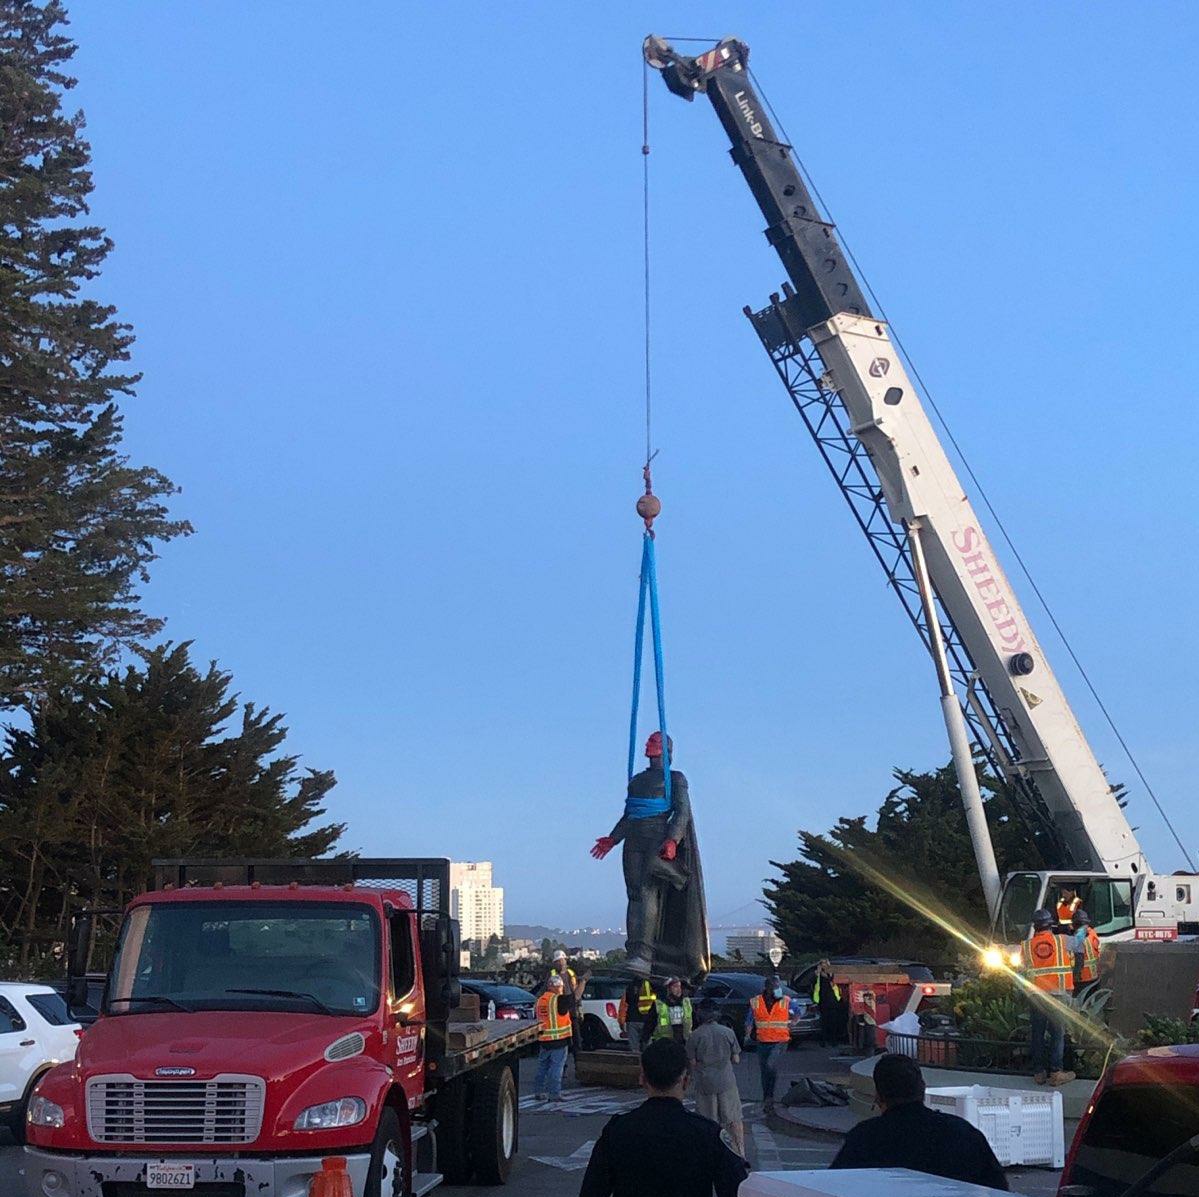 BREAKING: Christopher Columbus statue at San Francisco's Coit Tower taken down early this morning.This is ahead of a planned protest that planned to throw it into the bay.